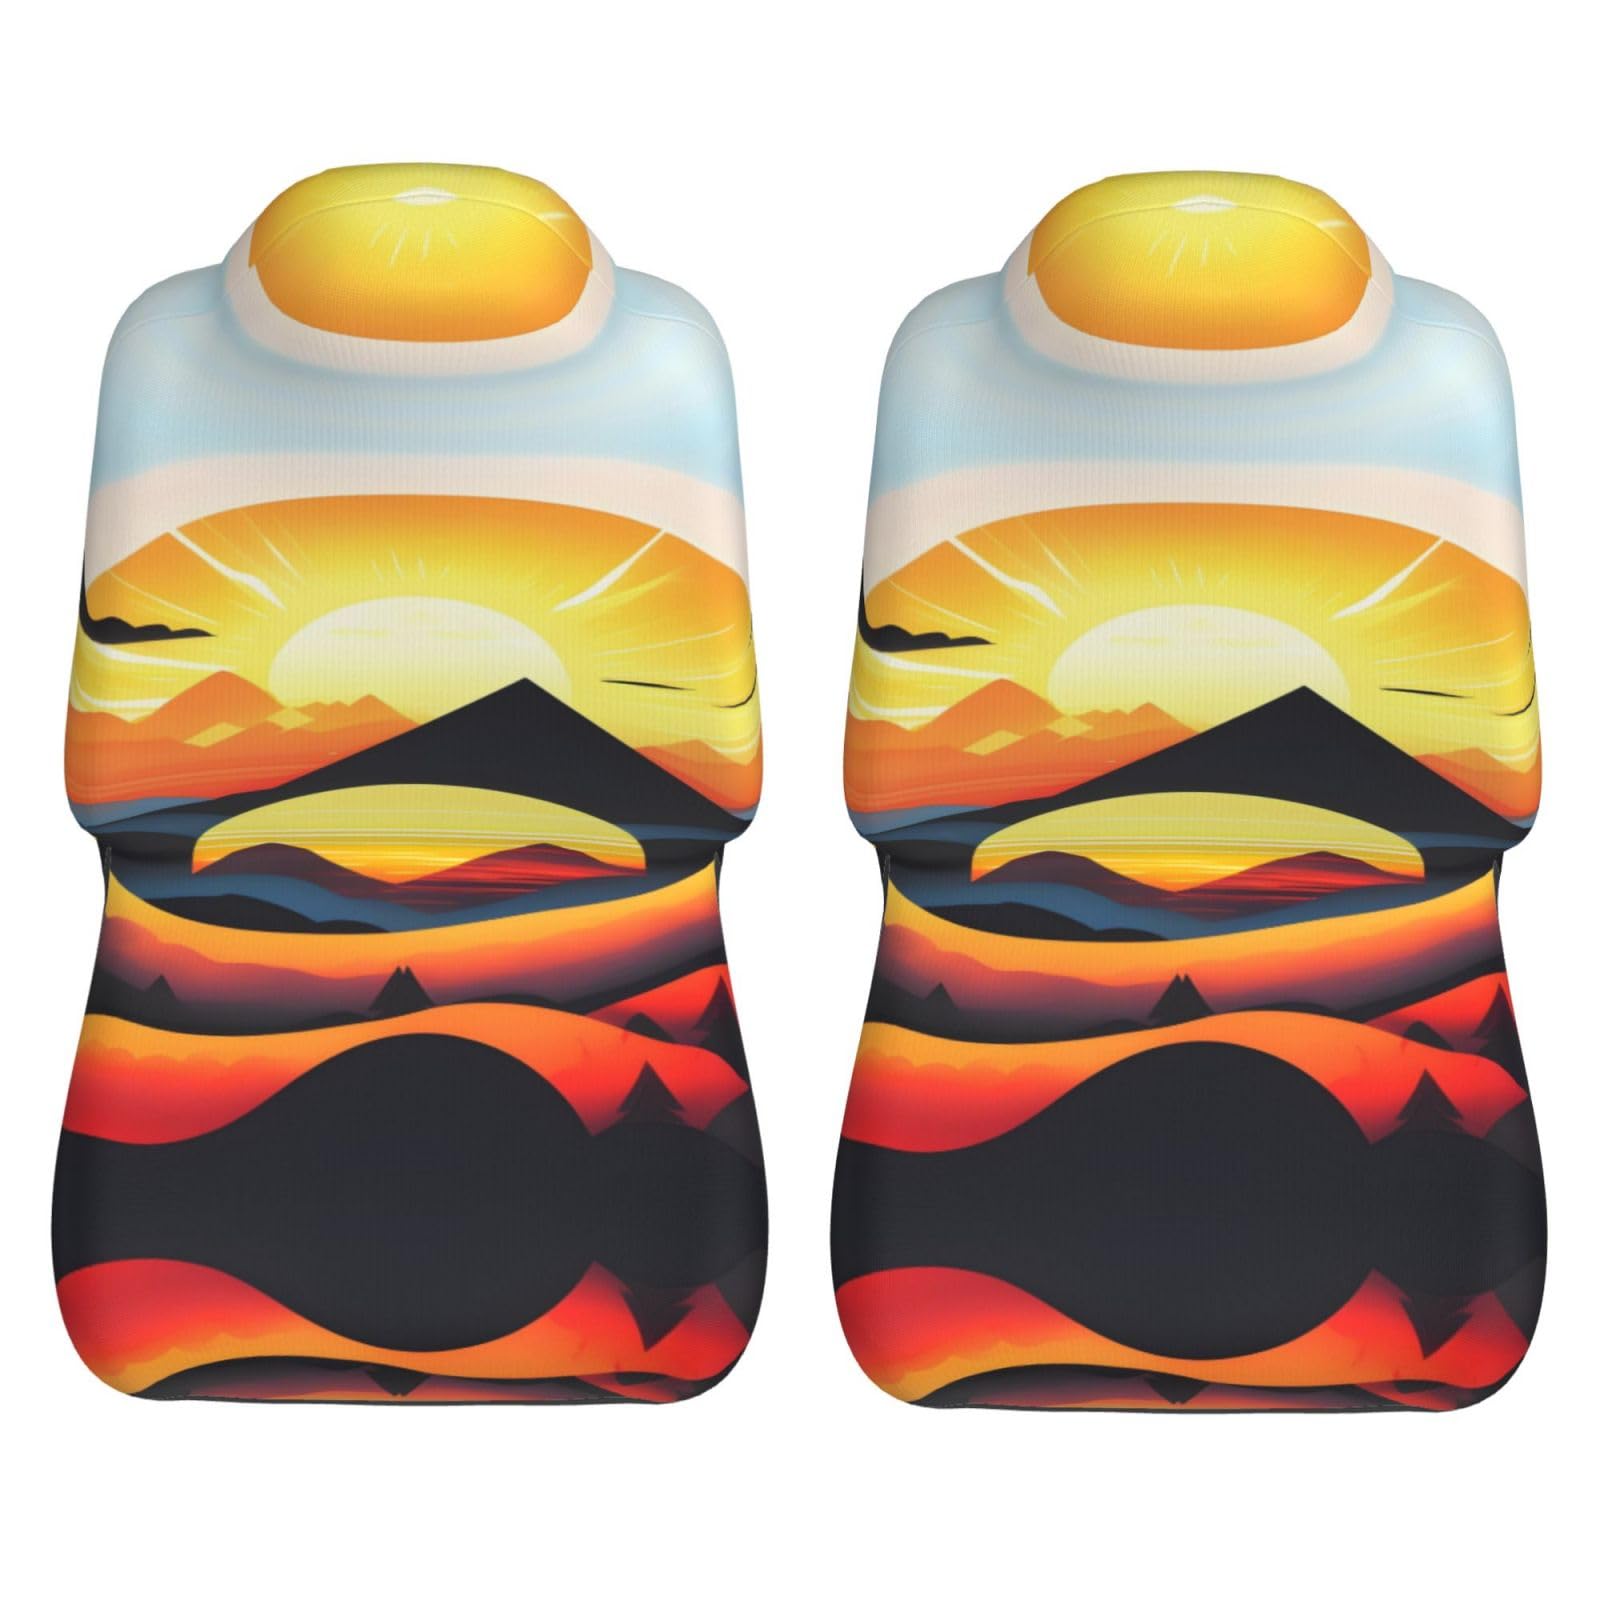 Sunrise Mountain Car seat Covers Front seat Protectors Washable and Breathable Cloth car Seats Suitable for Most Cars